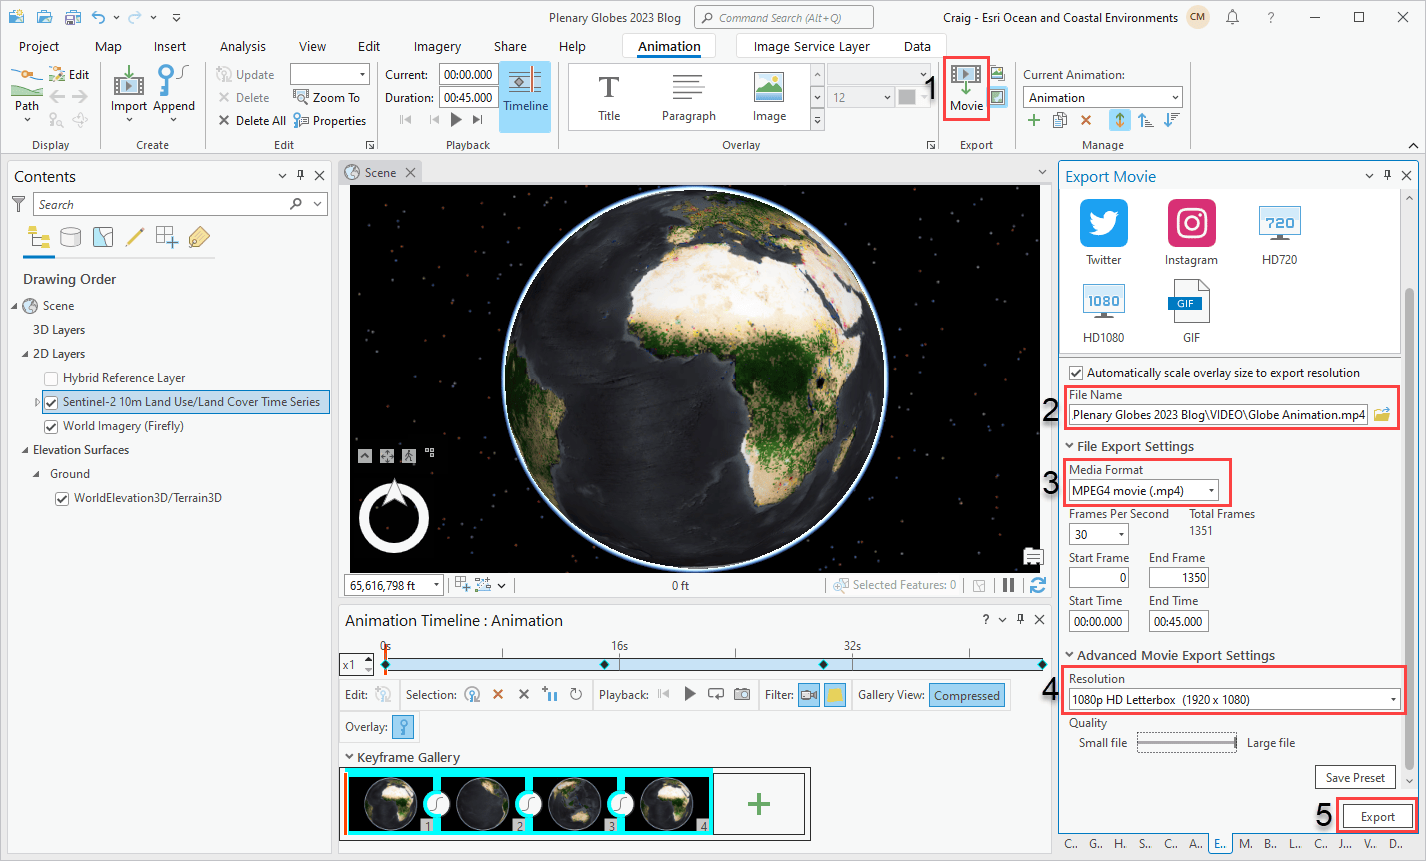 Export Animation Settings in Pro